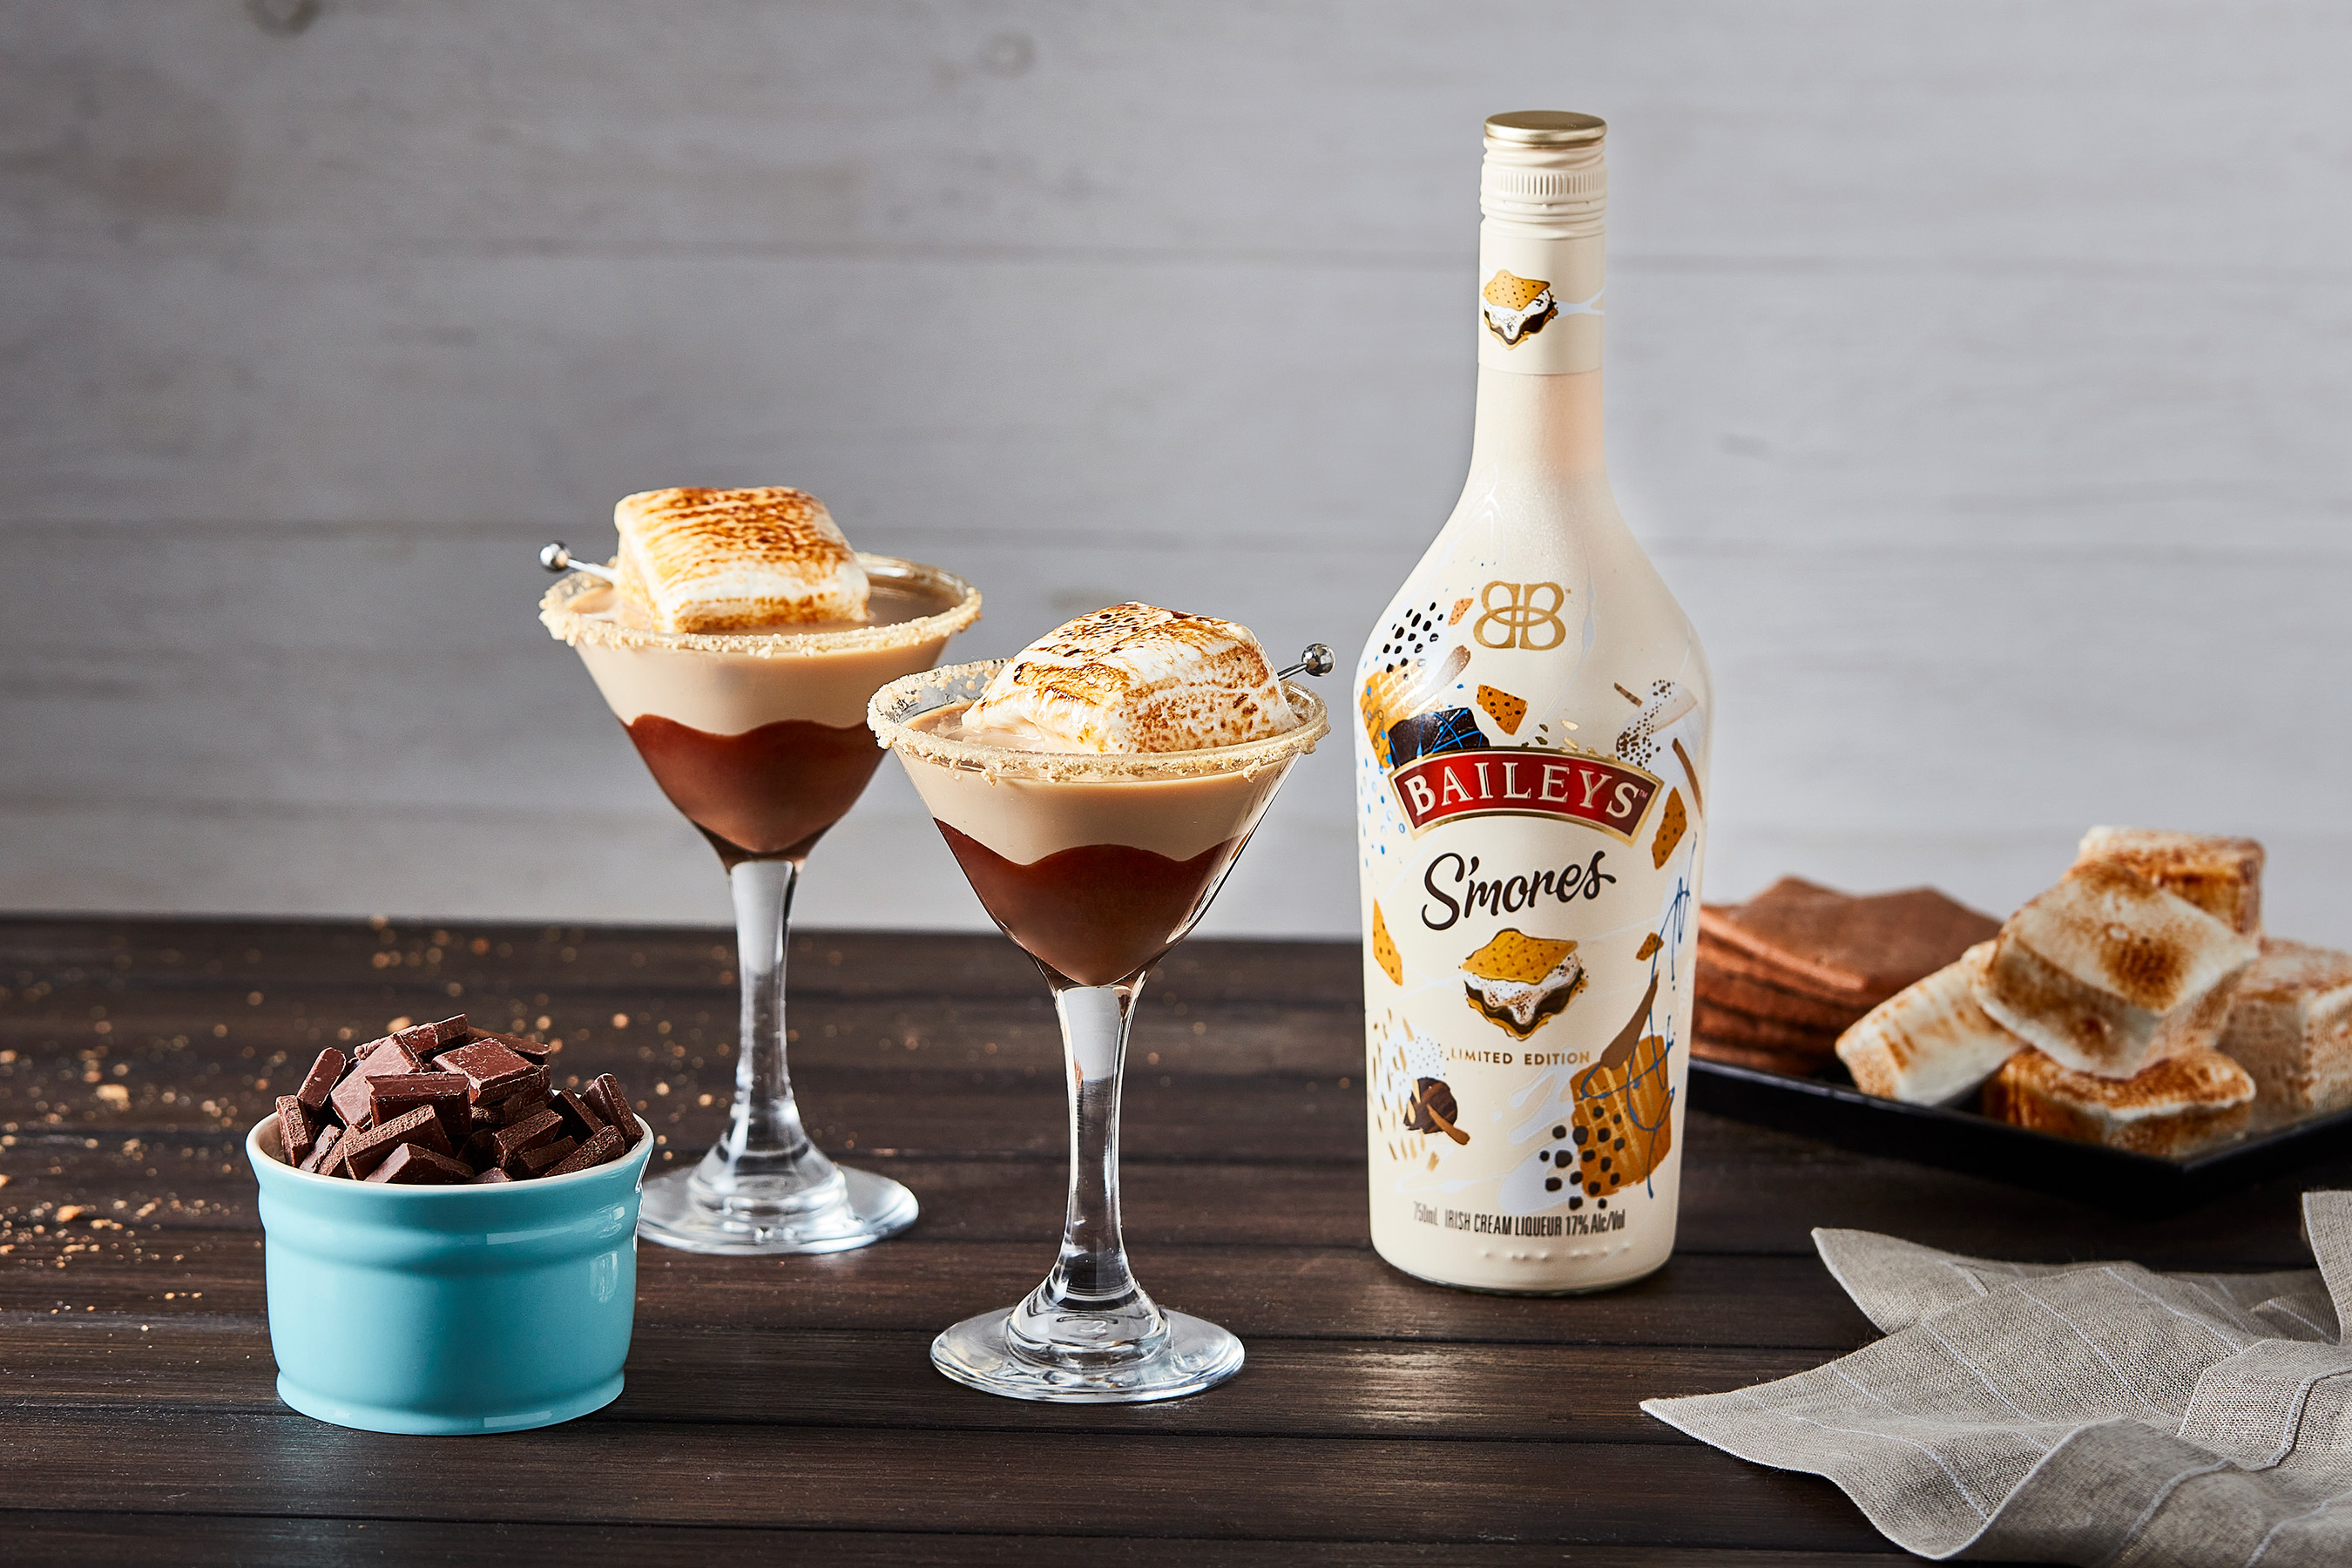 Whether enjoyed neat, with whipped coffee or even in a marshmallow shot, Baileys S’mores gives you more ways to enjoy the classic treat anytime, anywhere!